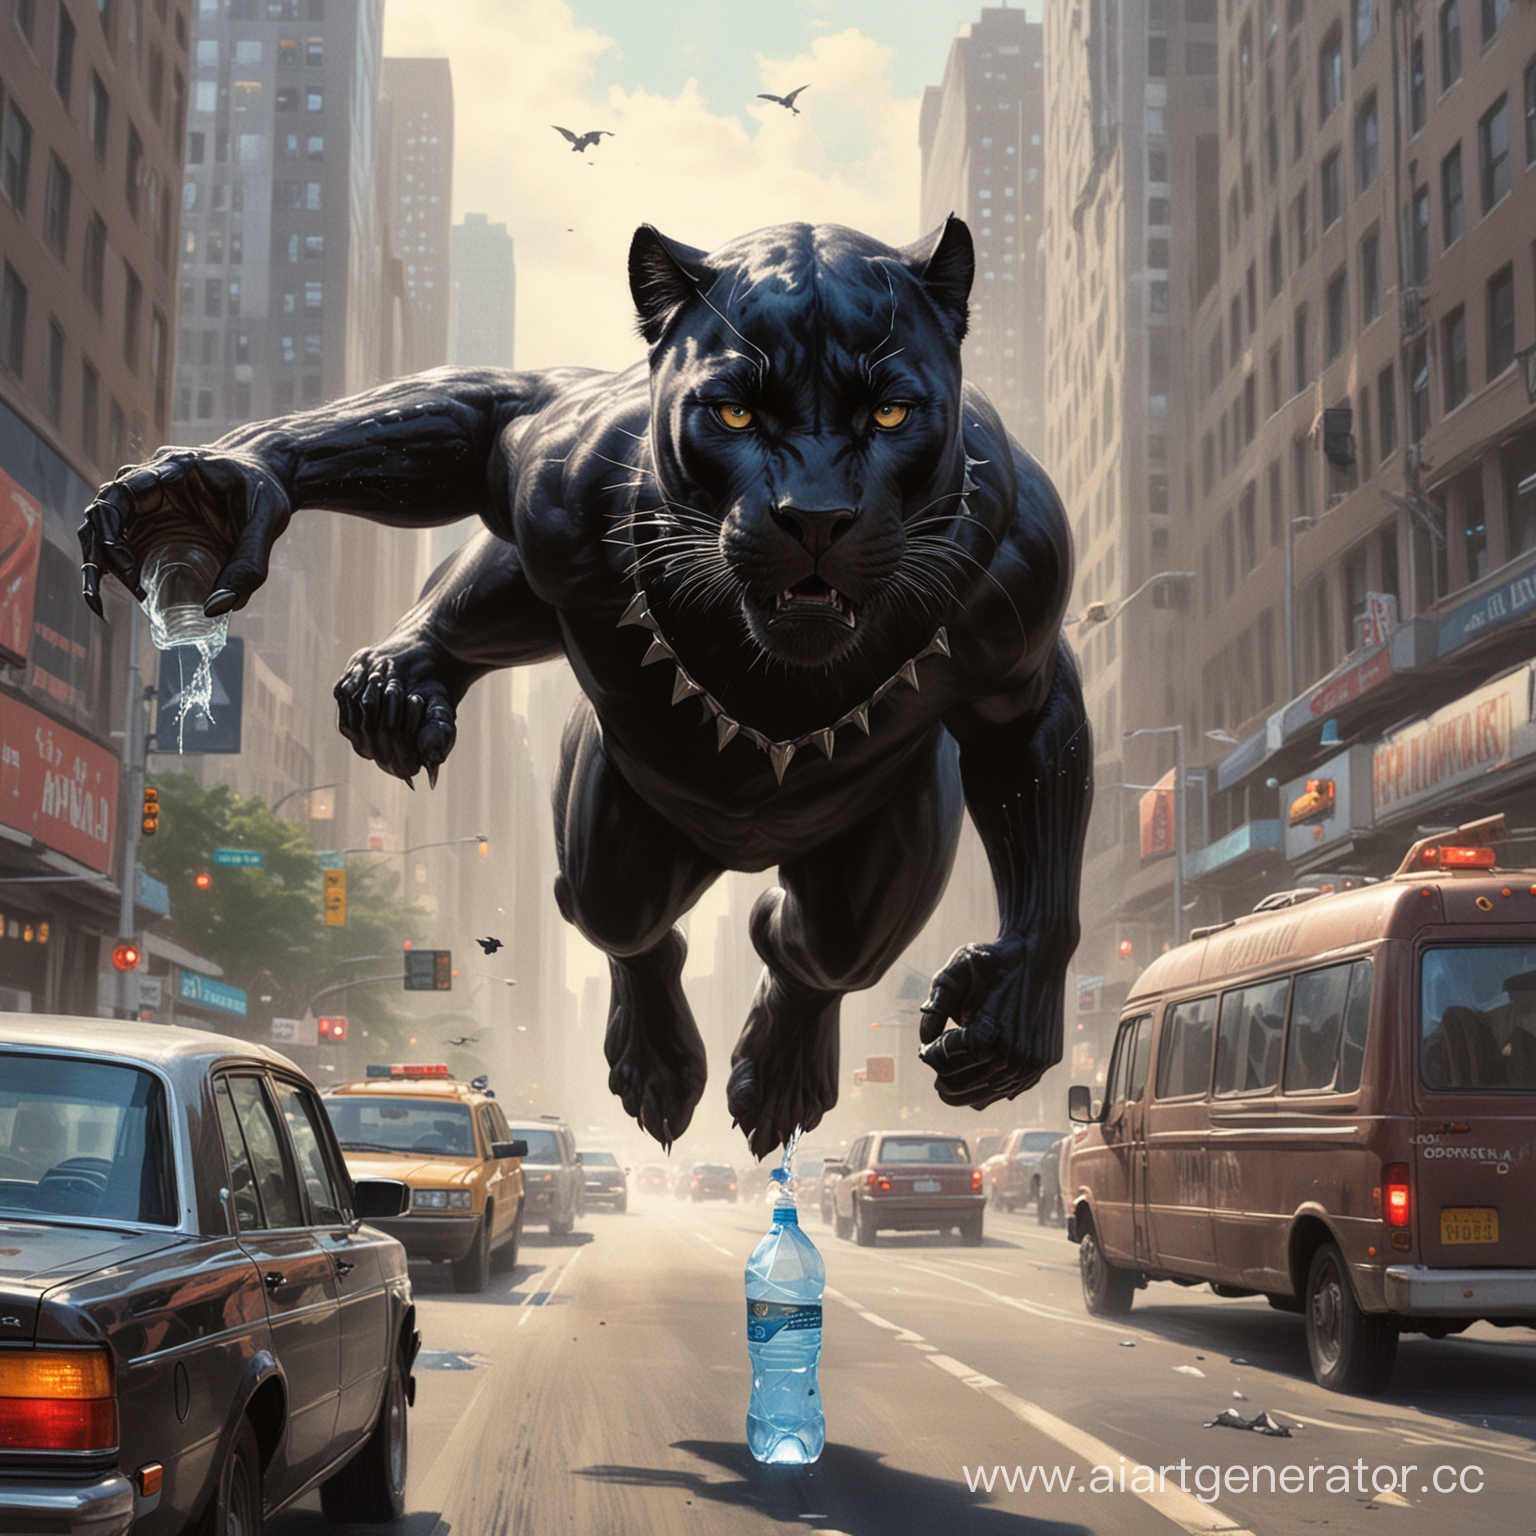 The black panther runs quickly through city traffic jams, flying over cars, holding a bottle of water in his teeth